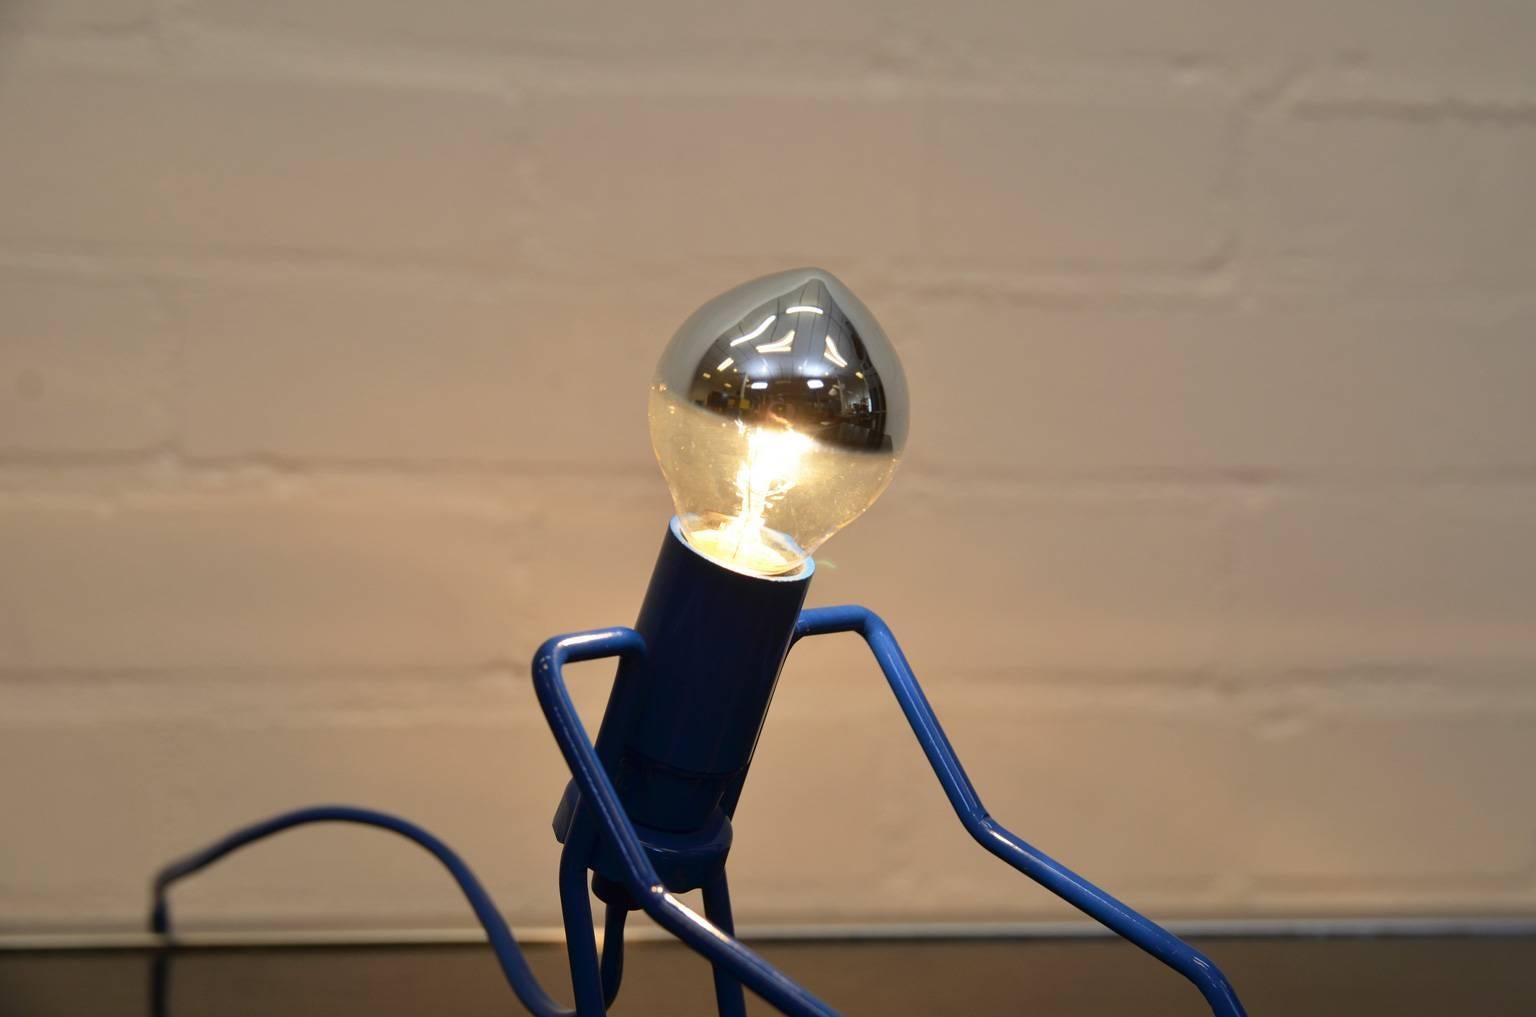 Rare and unique 'man' lamp. Smart use of wired metal and the finishing touch is the lamp depicting the man's head.